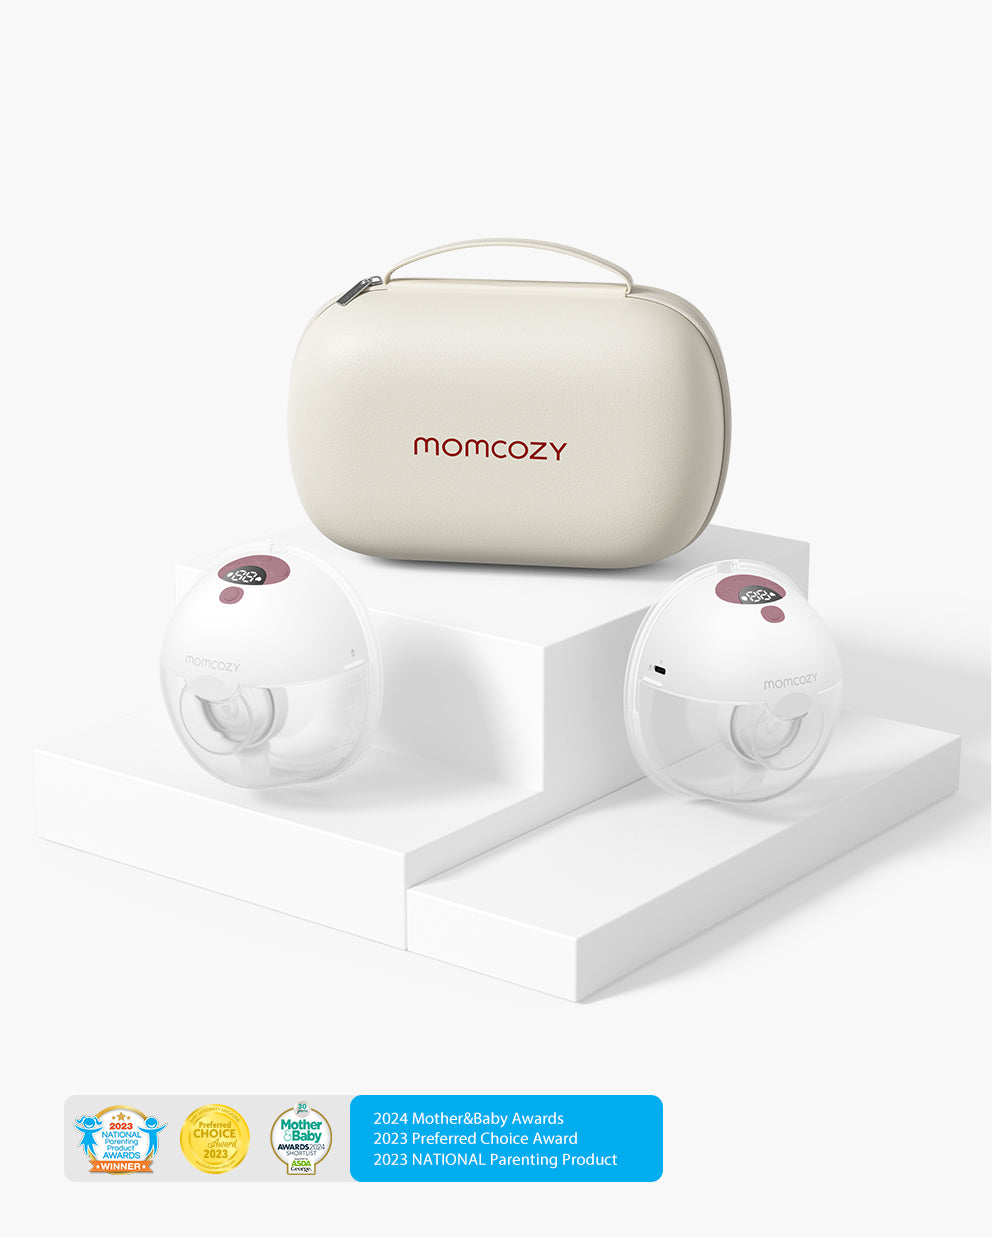 Momcozy S9 Double Wearable Breast Pump Manual: Easy Assembly